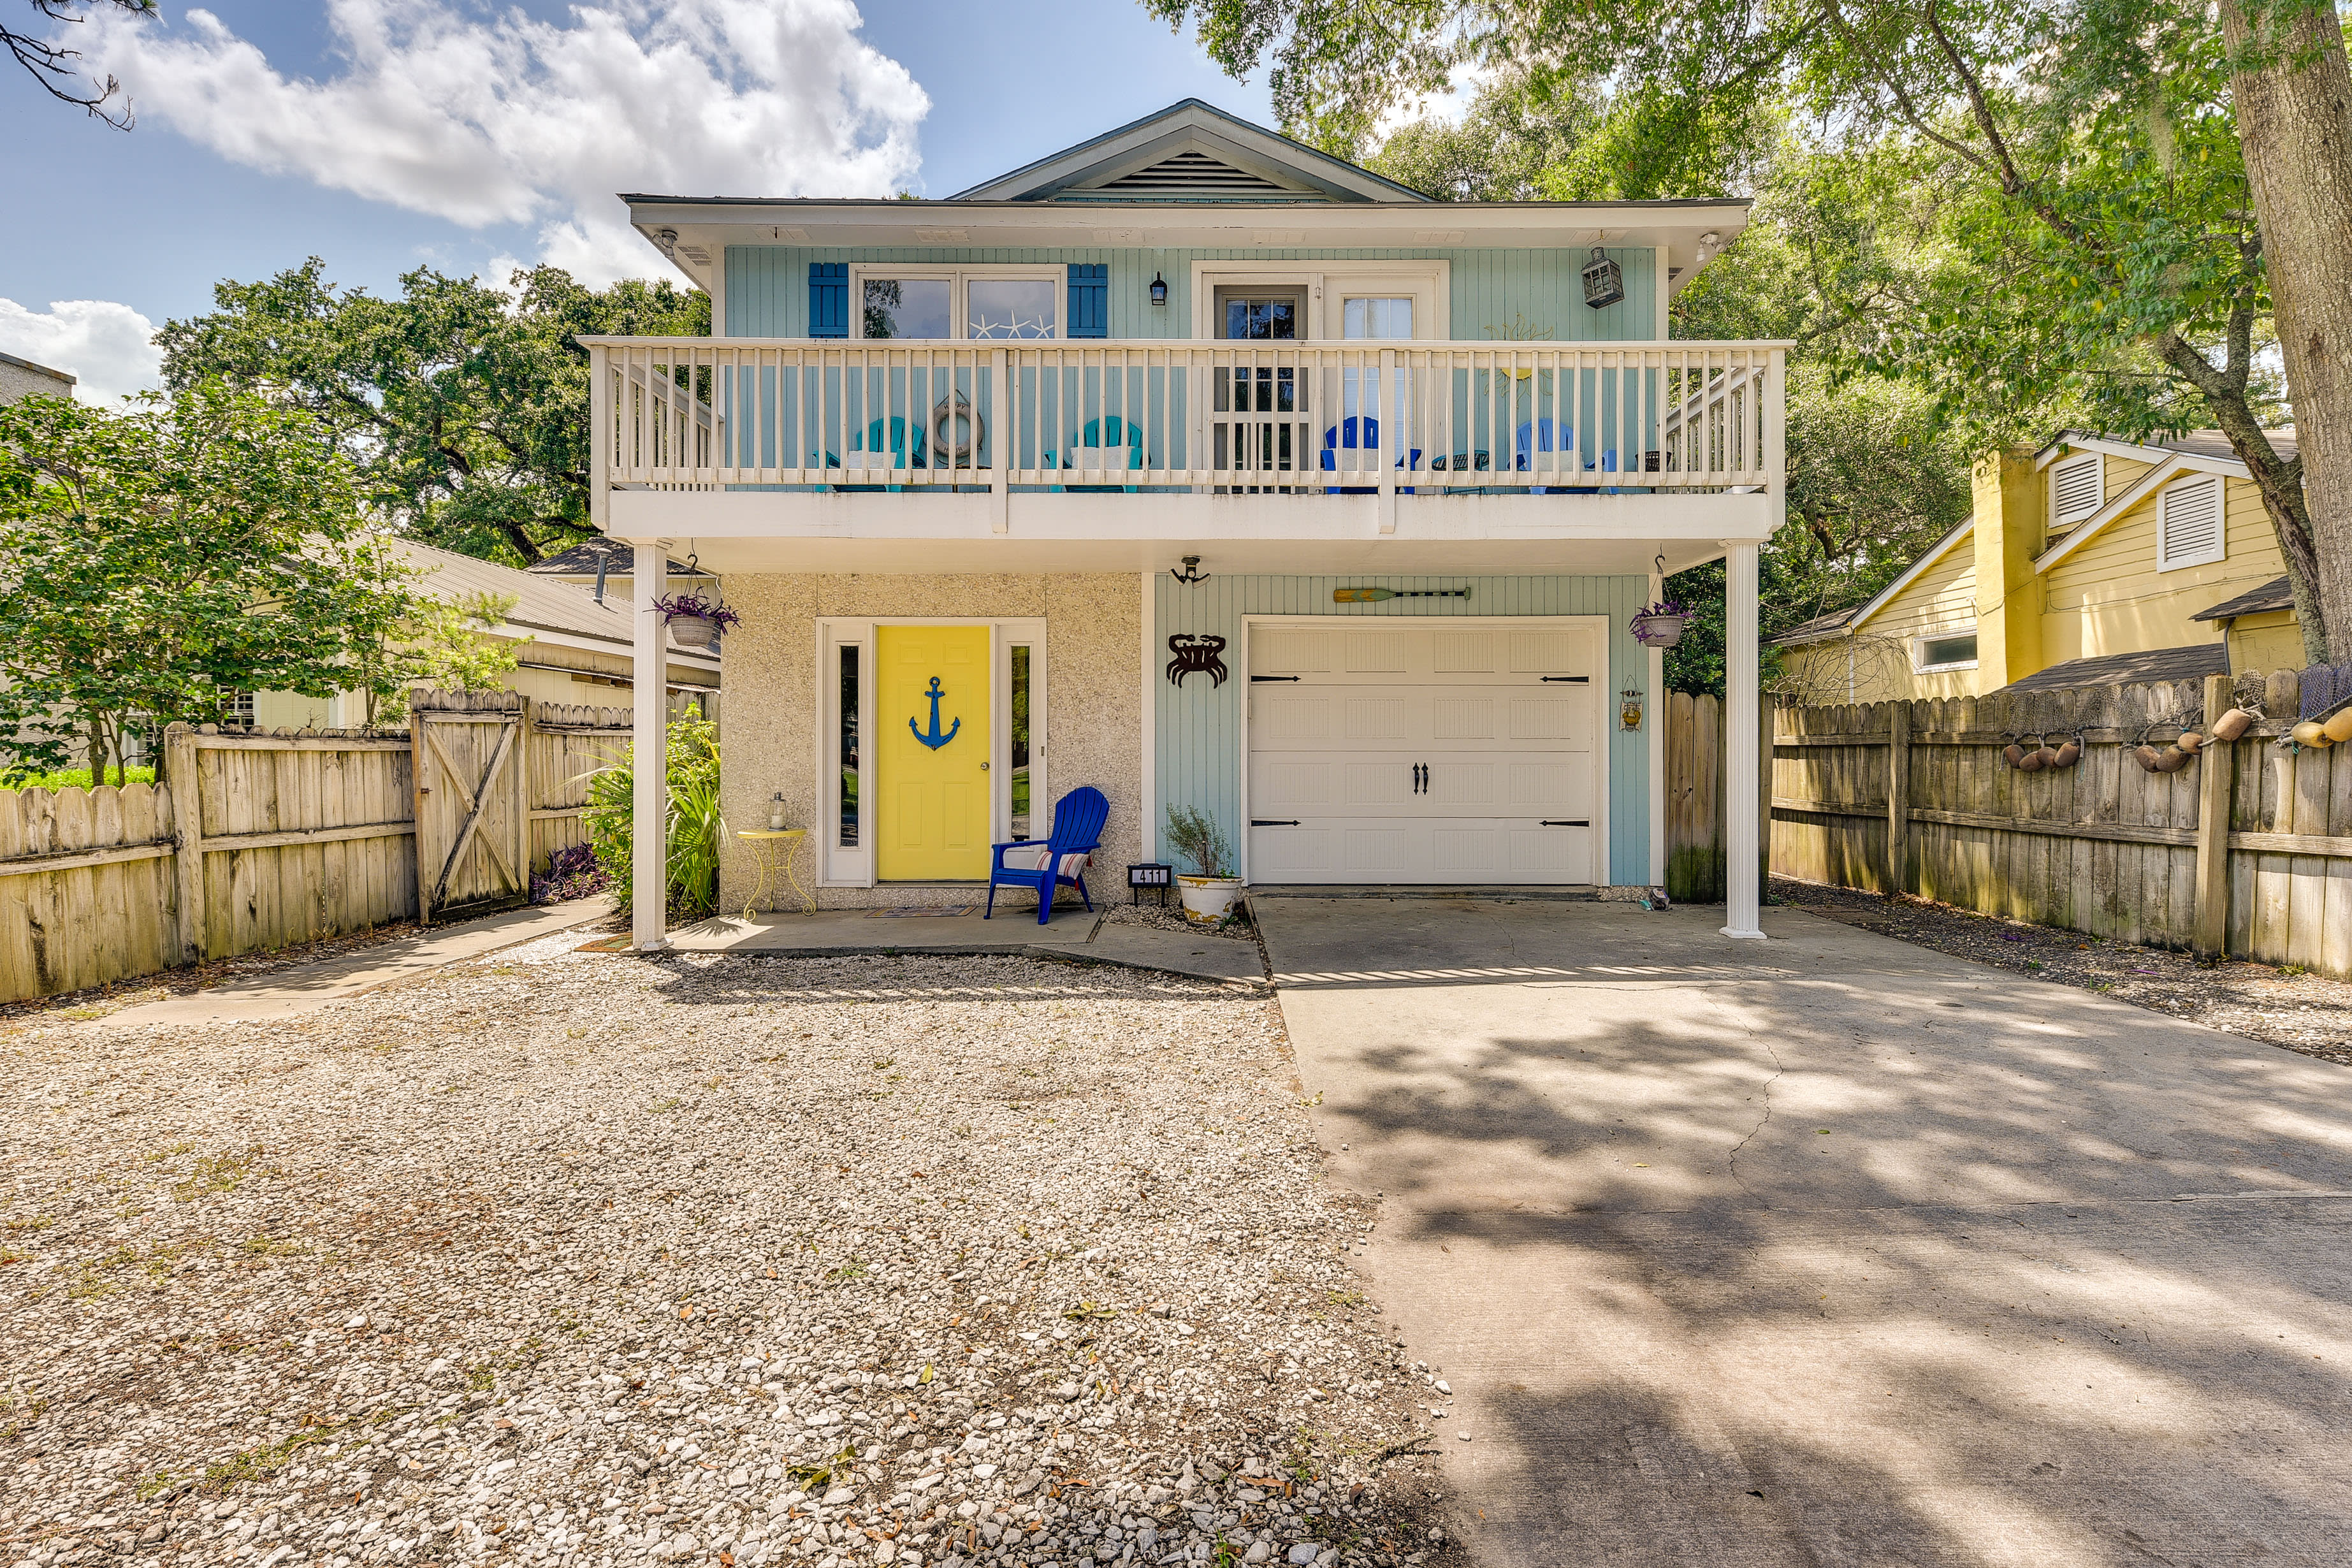 St. Simons Island Vacation Rental | 5BR | 3BA | Stairs Required